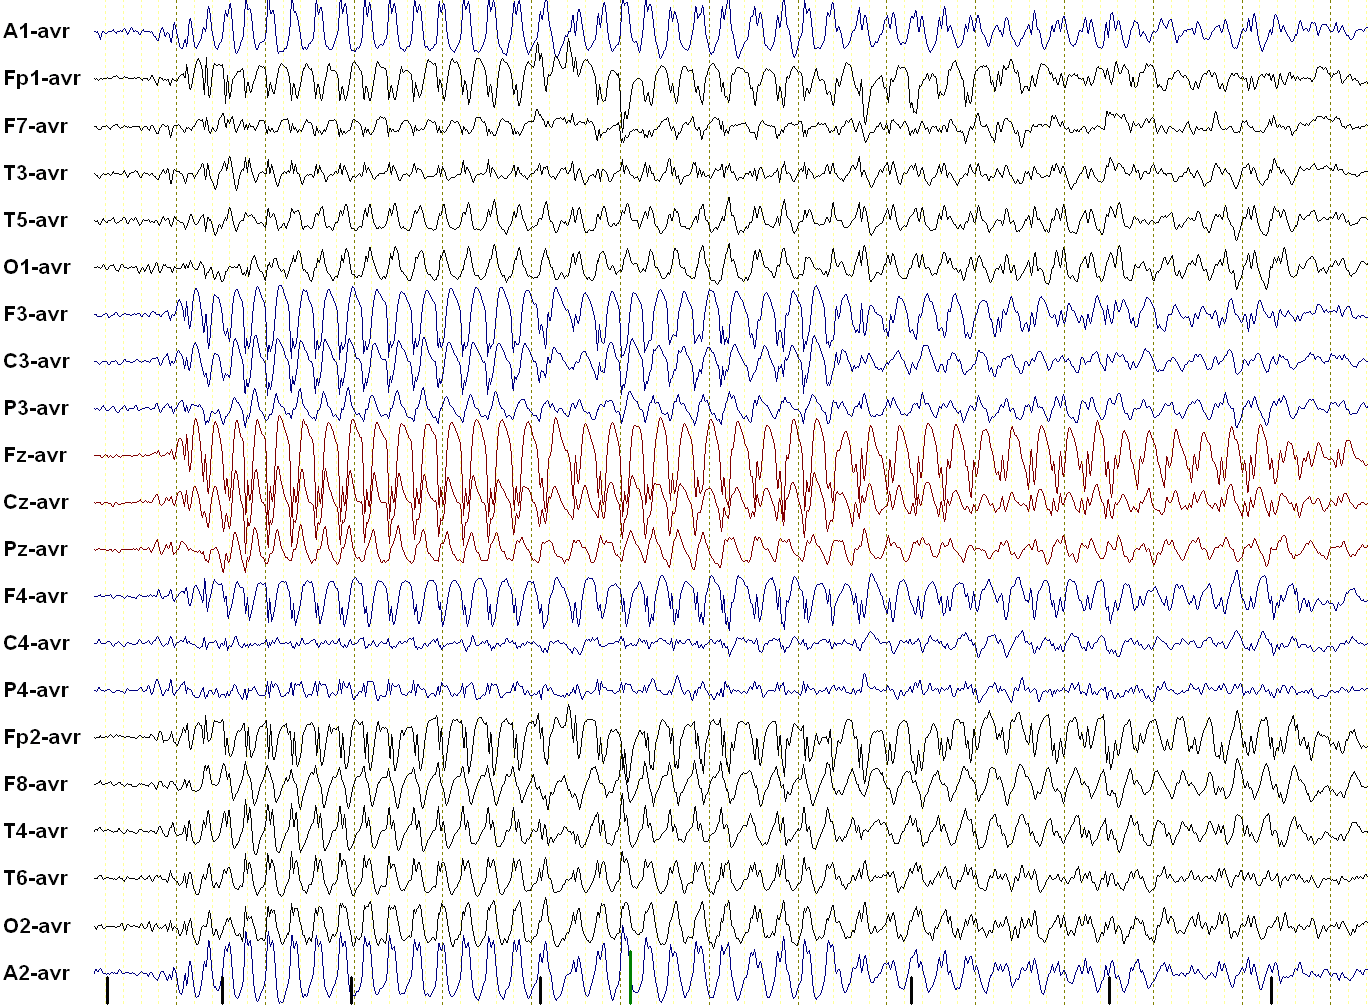 petit mal seizure in absence epilepsy: 3 Hz spike and wave EEG